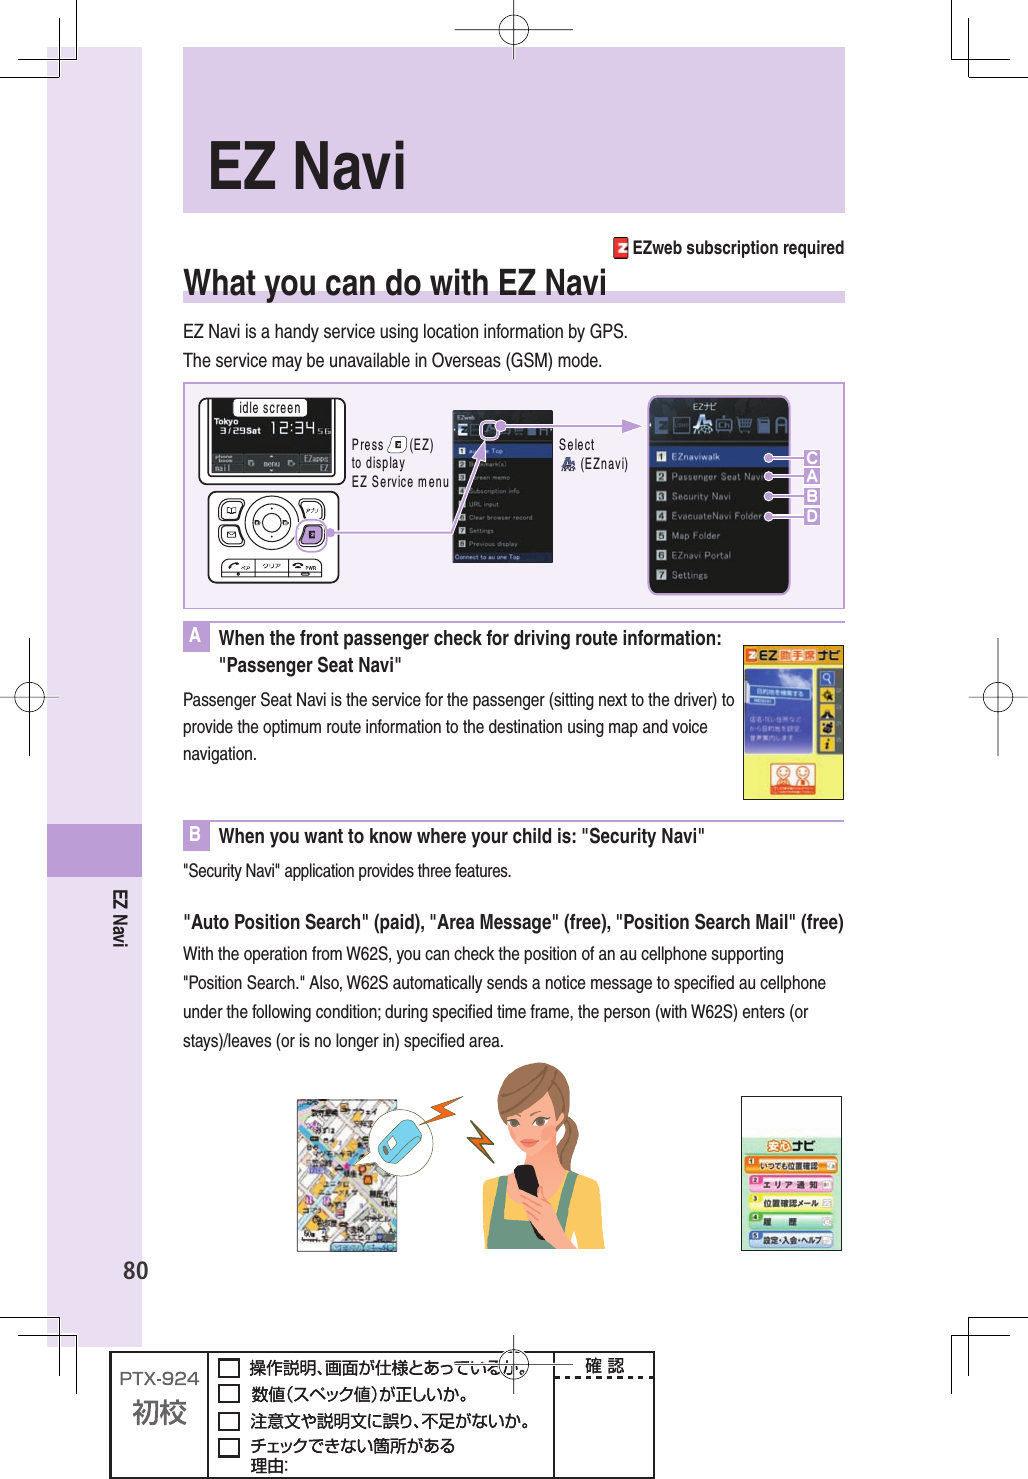 80EZ Navi EZweb subscription requiredWhat you can do with EZ NaviEZ Navi is a handy service using location information by GPS.The service may be unavailable in Overseas (GSM) mode.IDLESCREEN3ELECT%:NAVIBCDA0RESS%:TODISPLAY%:3ERVICEMENUA  When the front passenger check for driving route information:&quot;Passenger Seat Navi&quot;Passenger Seat Navi is the service for the passenger (sitting next to the driver) to provide the optimum route information to the destination using map and voice navigation.B  When you want to know where your child is: &quot;Security Navi&quot;&quot;Security Navi&quot; application provides three features.&quot;Auto Position Search&quot; (paid), &quot;Area Message&quot; (free), &quot;Position Search Mail&quot; (free)With the operation from W62S, you can check the position of an au cellphone supporting &quot;Position Search.&quot; Also, W62S automatically sends a notice message to speciﬁ ed au cellphone under the following condition; during speciﬁ ed time frame, the person (with W62S) enters (or stays)/leaves (or is no longer in) speciﬁ ed area.  EZ  Navi